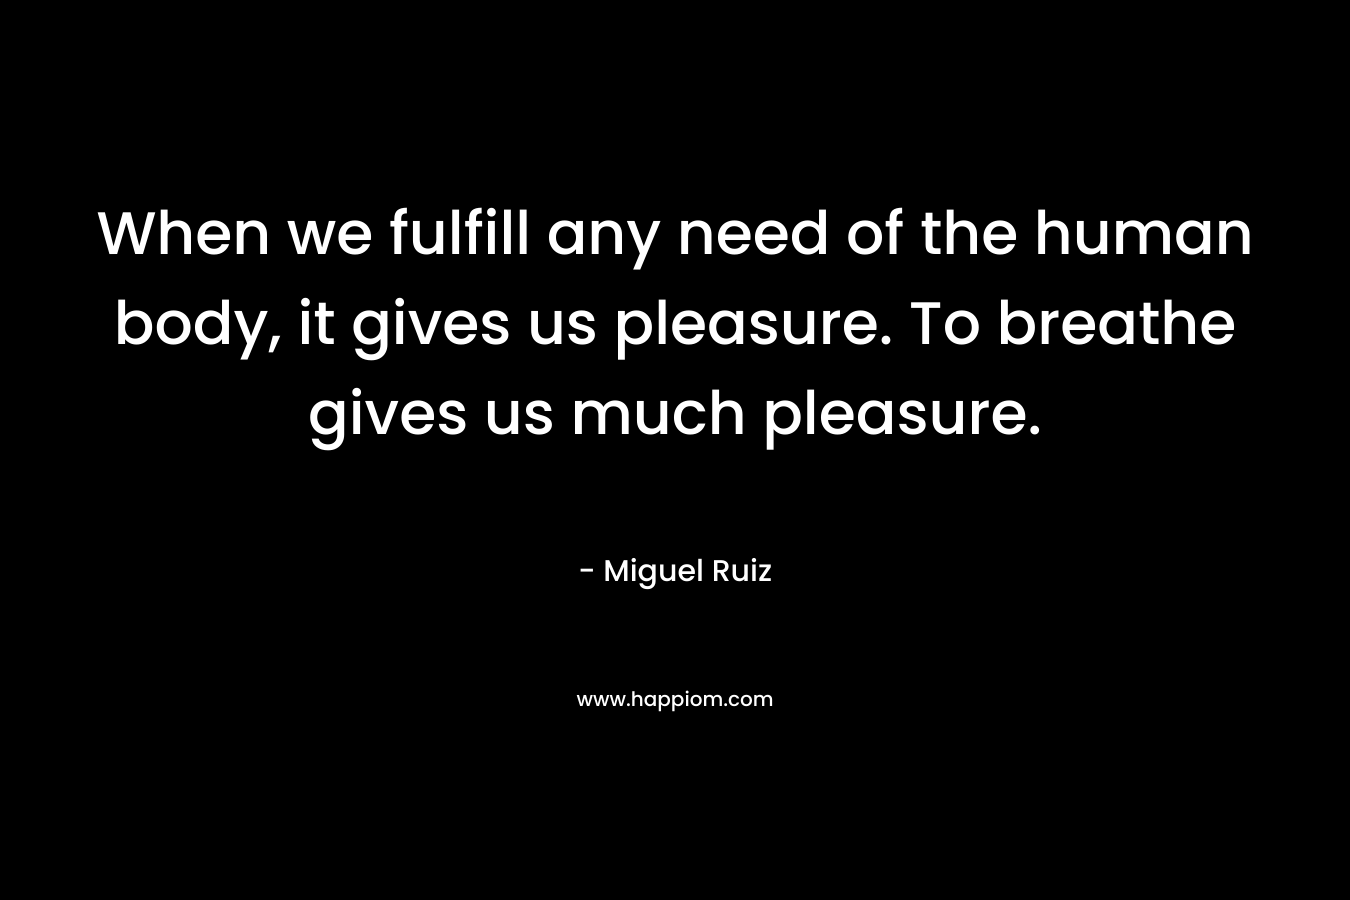 When we fulfill any need of the human body, it gives us pleasure. To breathe gives us much pleasure.